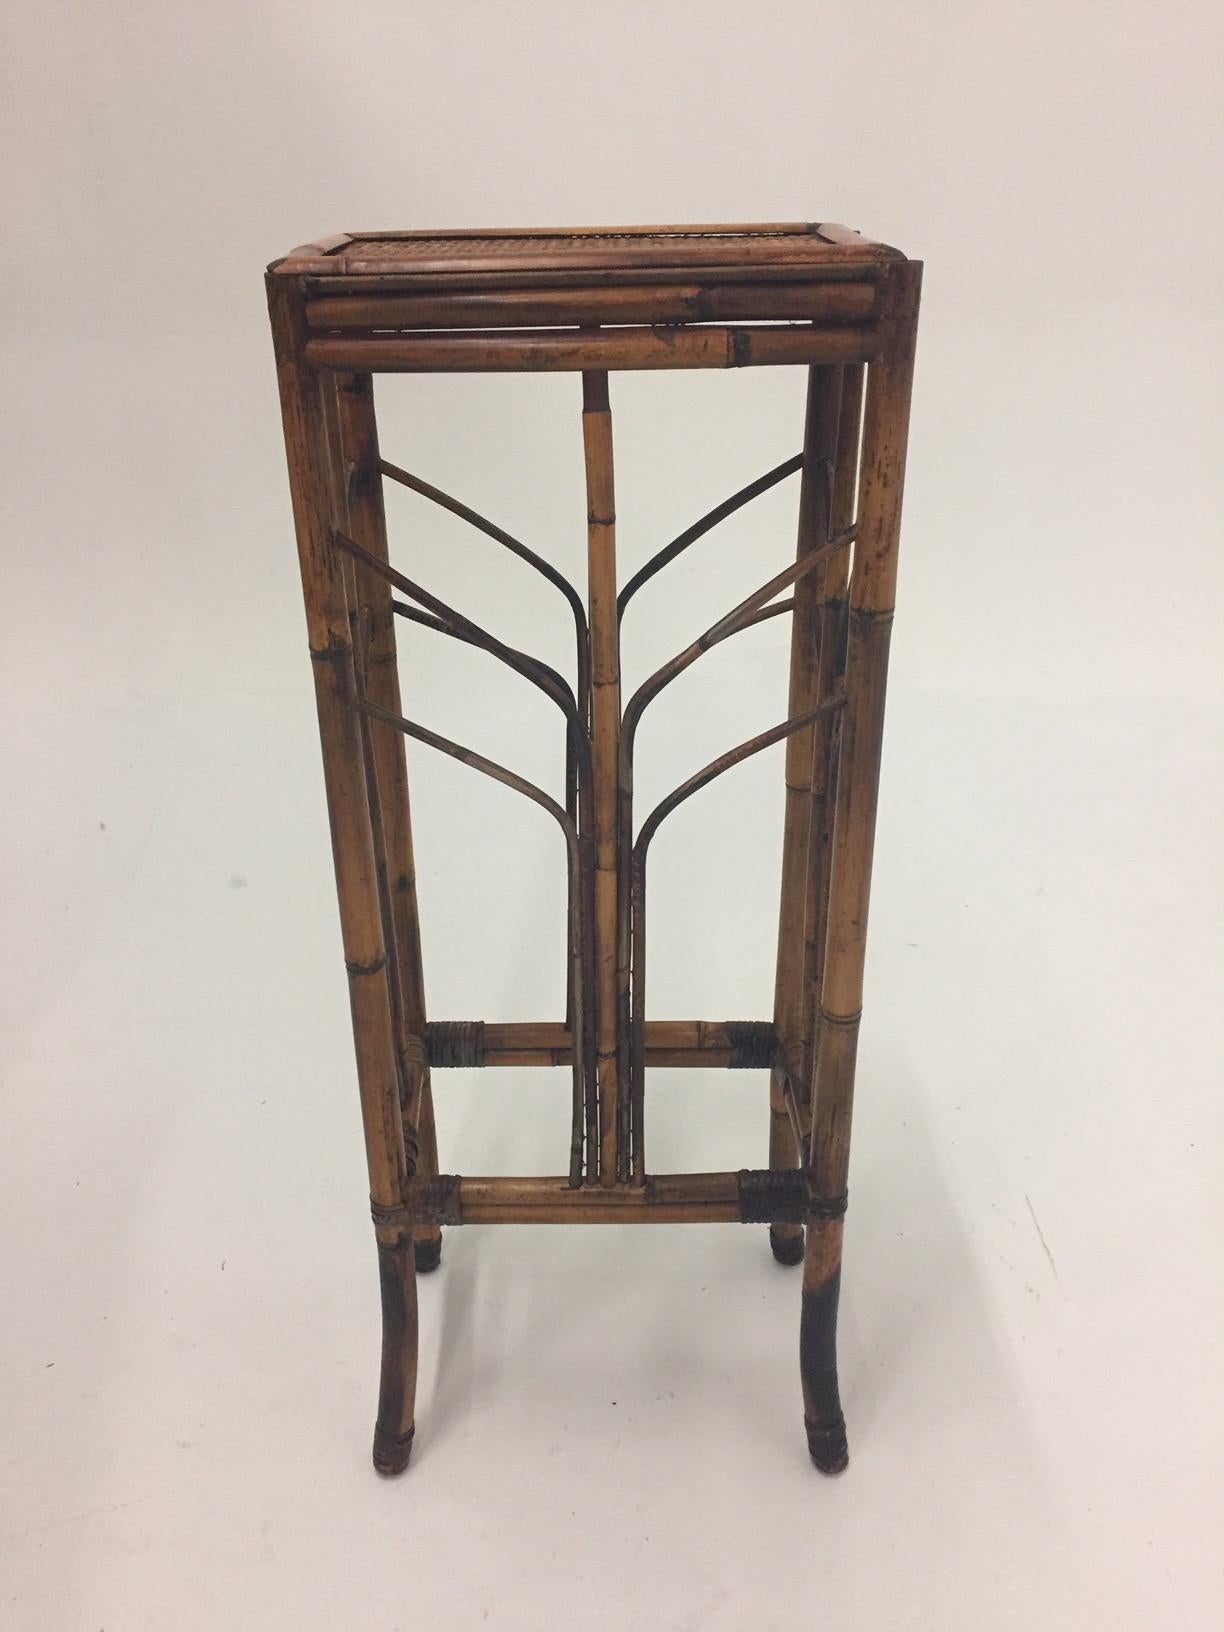 An elegant authentic bamboo pedestal, great in a foyer with a lamp on it or tray for keys.